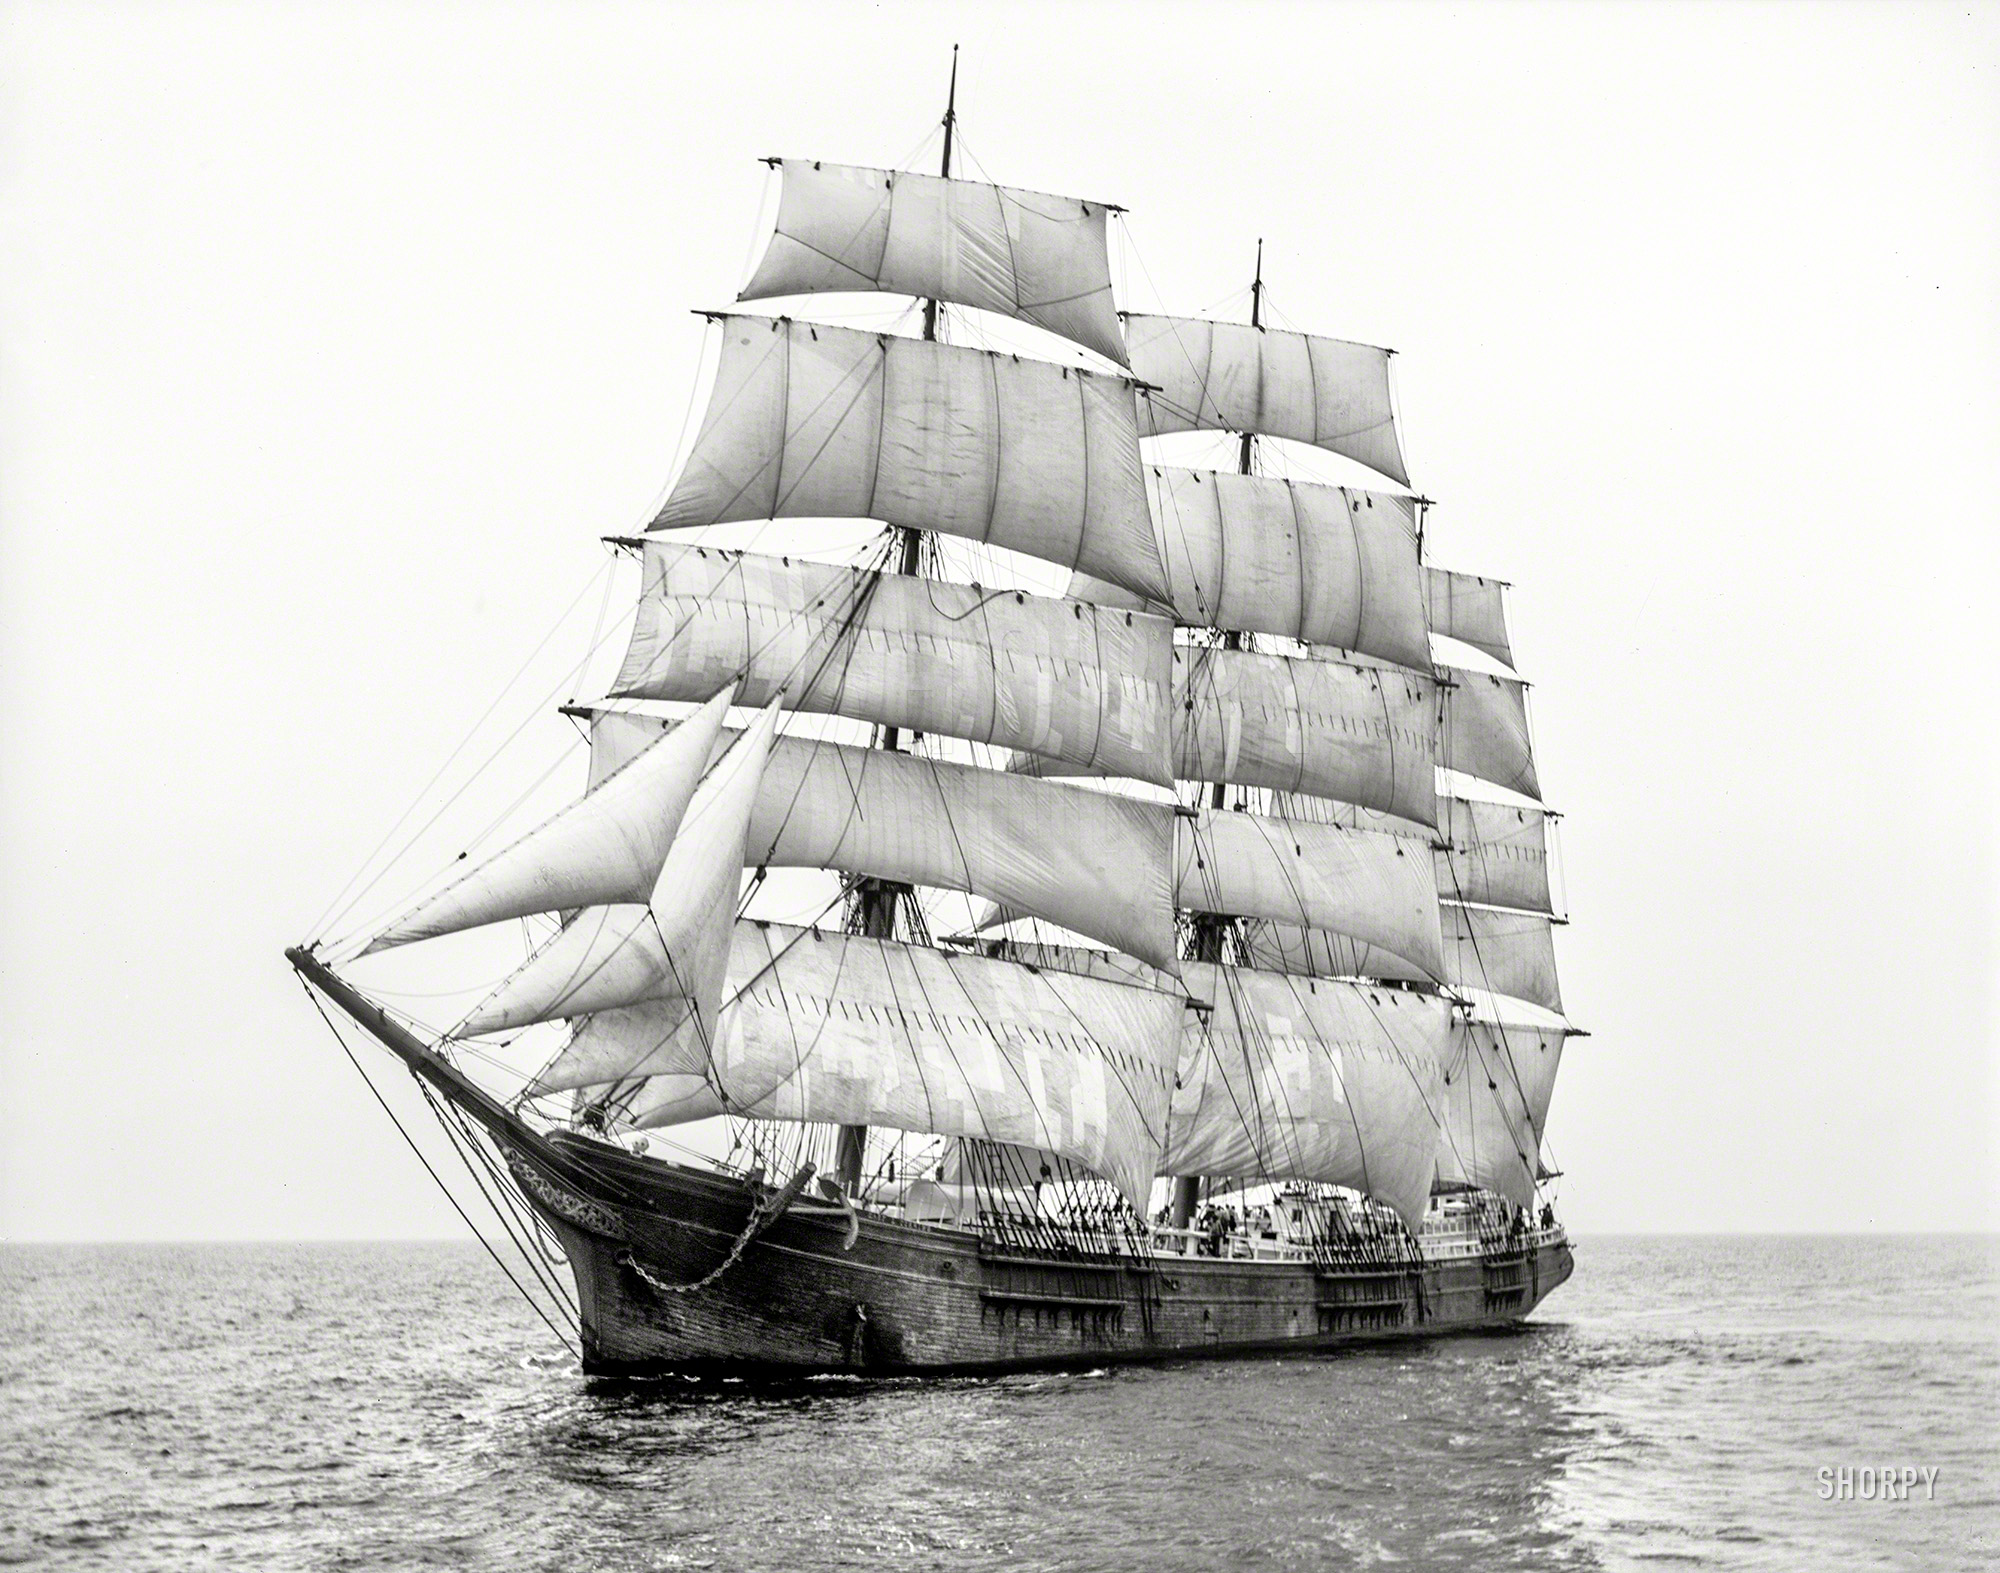 &nbsp; &nbsp; &nbsp; &nbsp; Said to have been the last full-rigged ship built in Massachusetts, the Mary L. Cushing was launched in Newburyport in 1883 by George E. Currier. Registered to Pendleton, Carver & Nichols of Searsport in 1895, and eventually sold into the salmon trade; disappeared from the register in 1907.
— Penobscot Marine Museum
Off Sandy Hook Light circa 1899. "Sailing ship Mary L. Cushing." 8x10 inch dry plate glass negative, Detroit Photographic Company. View full size.